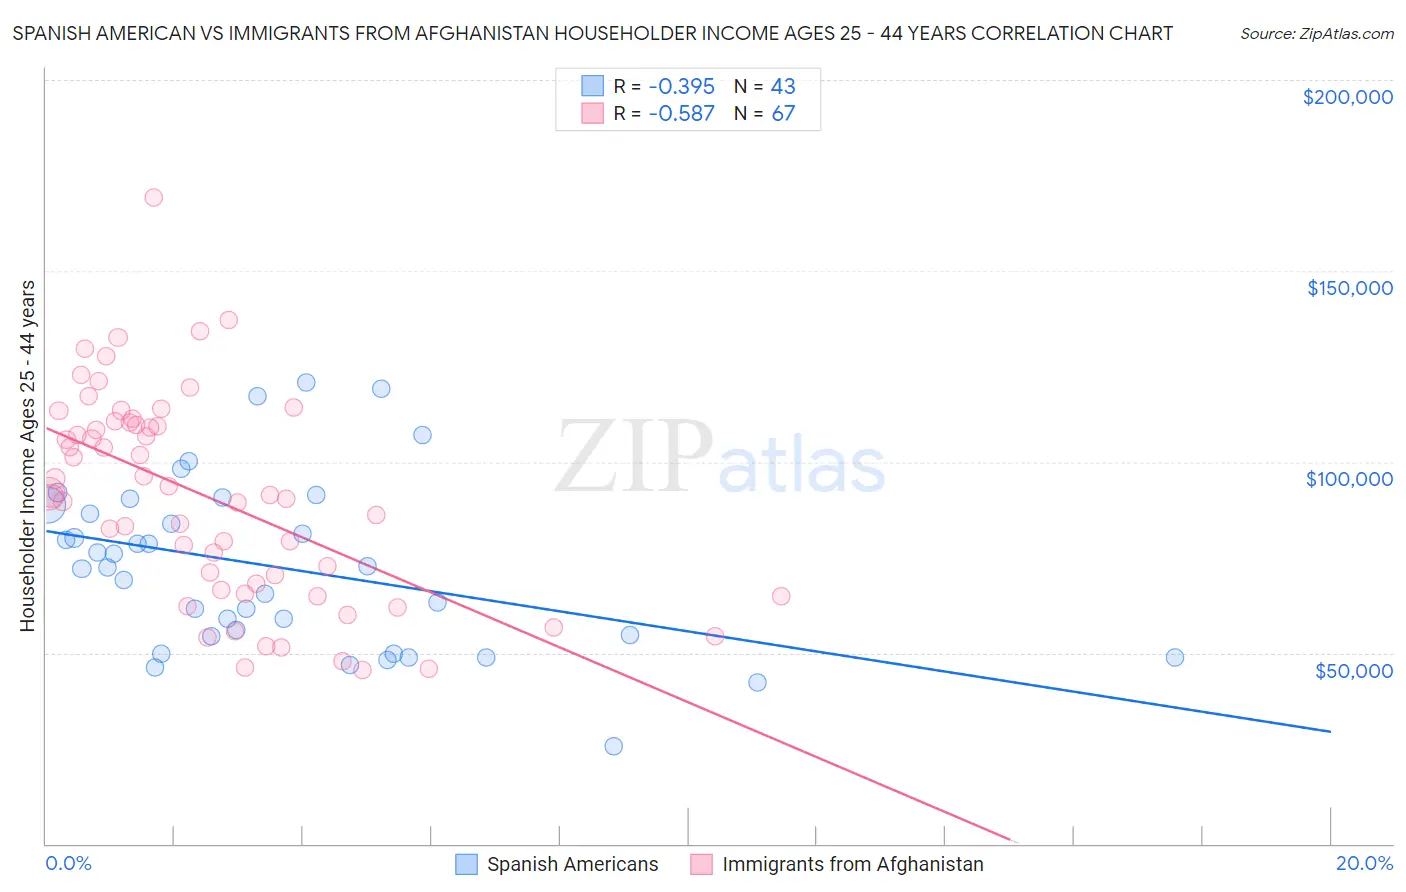 Spanish American vs Immigrants from Afghanistan Householder Income Ages 25 - 44 years